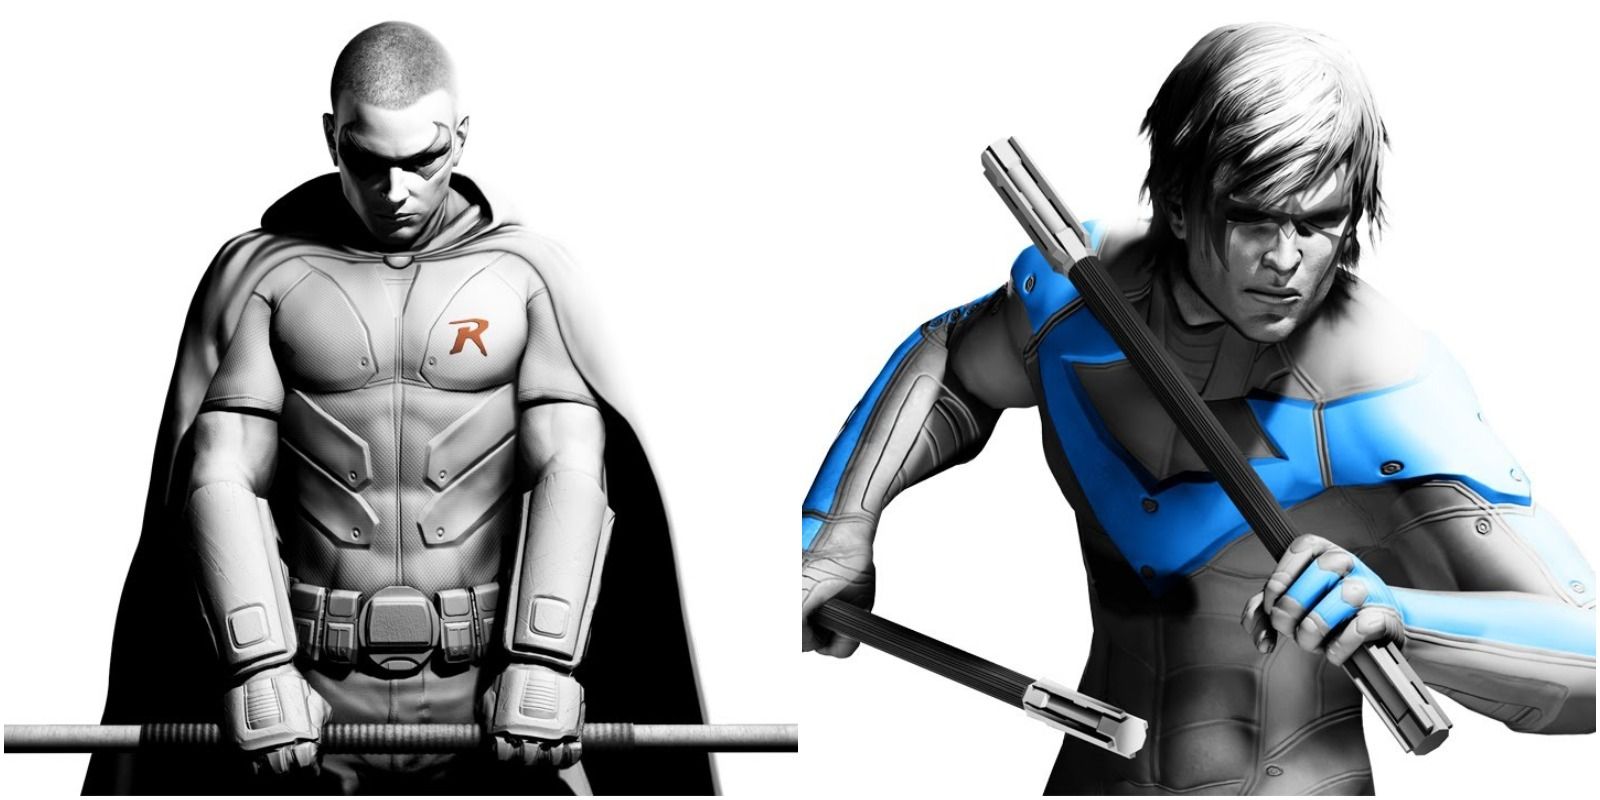 Tim Drake and Dick Grayson as Robin and Nightwing in Batman: Arkham City